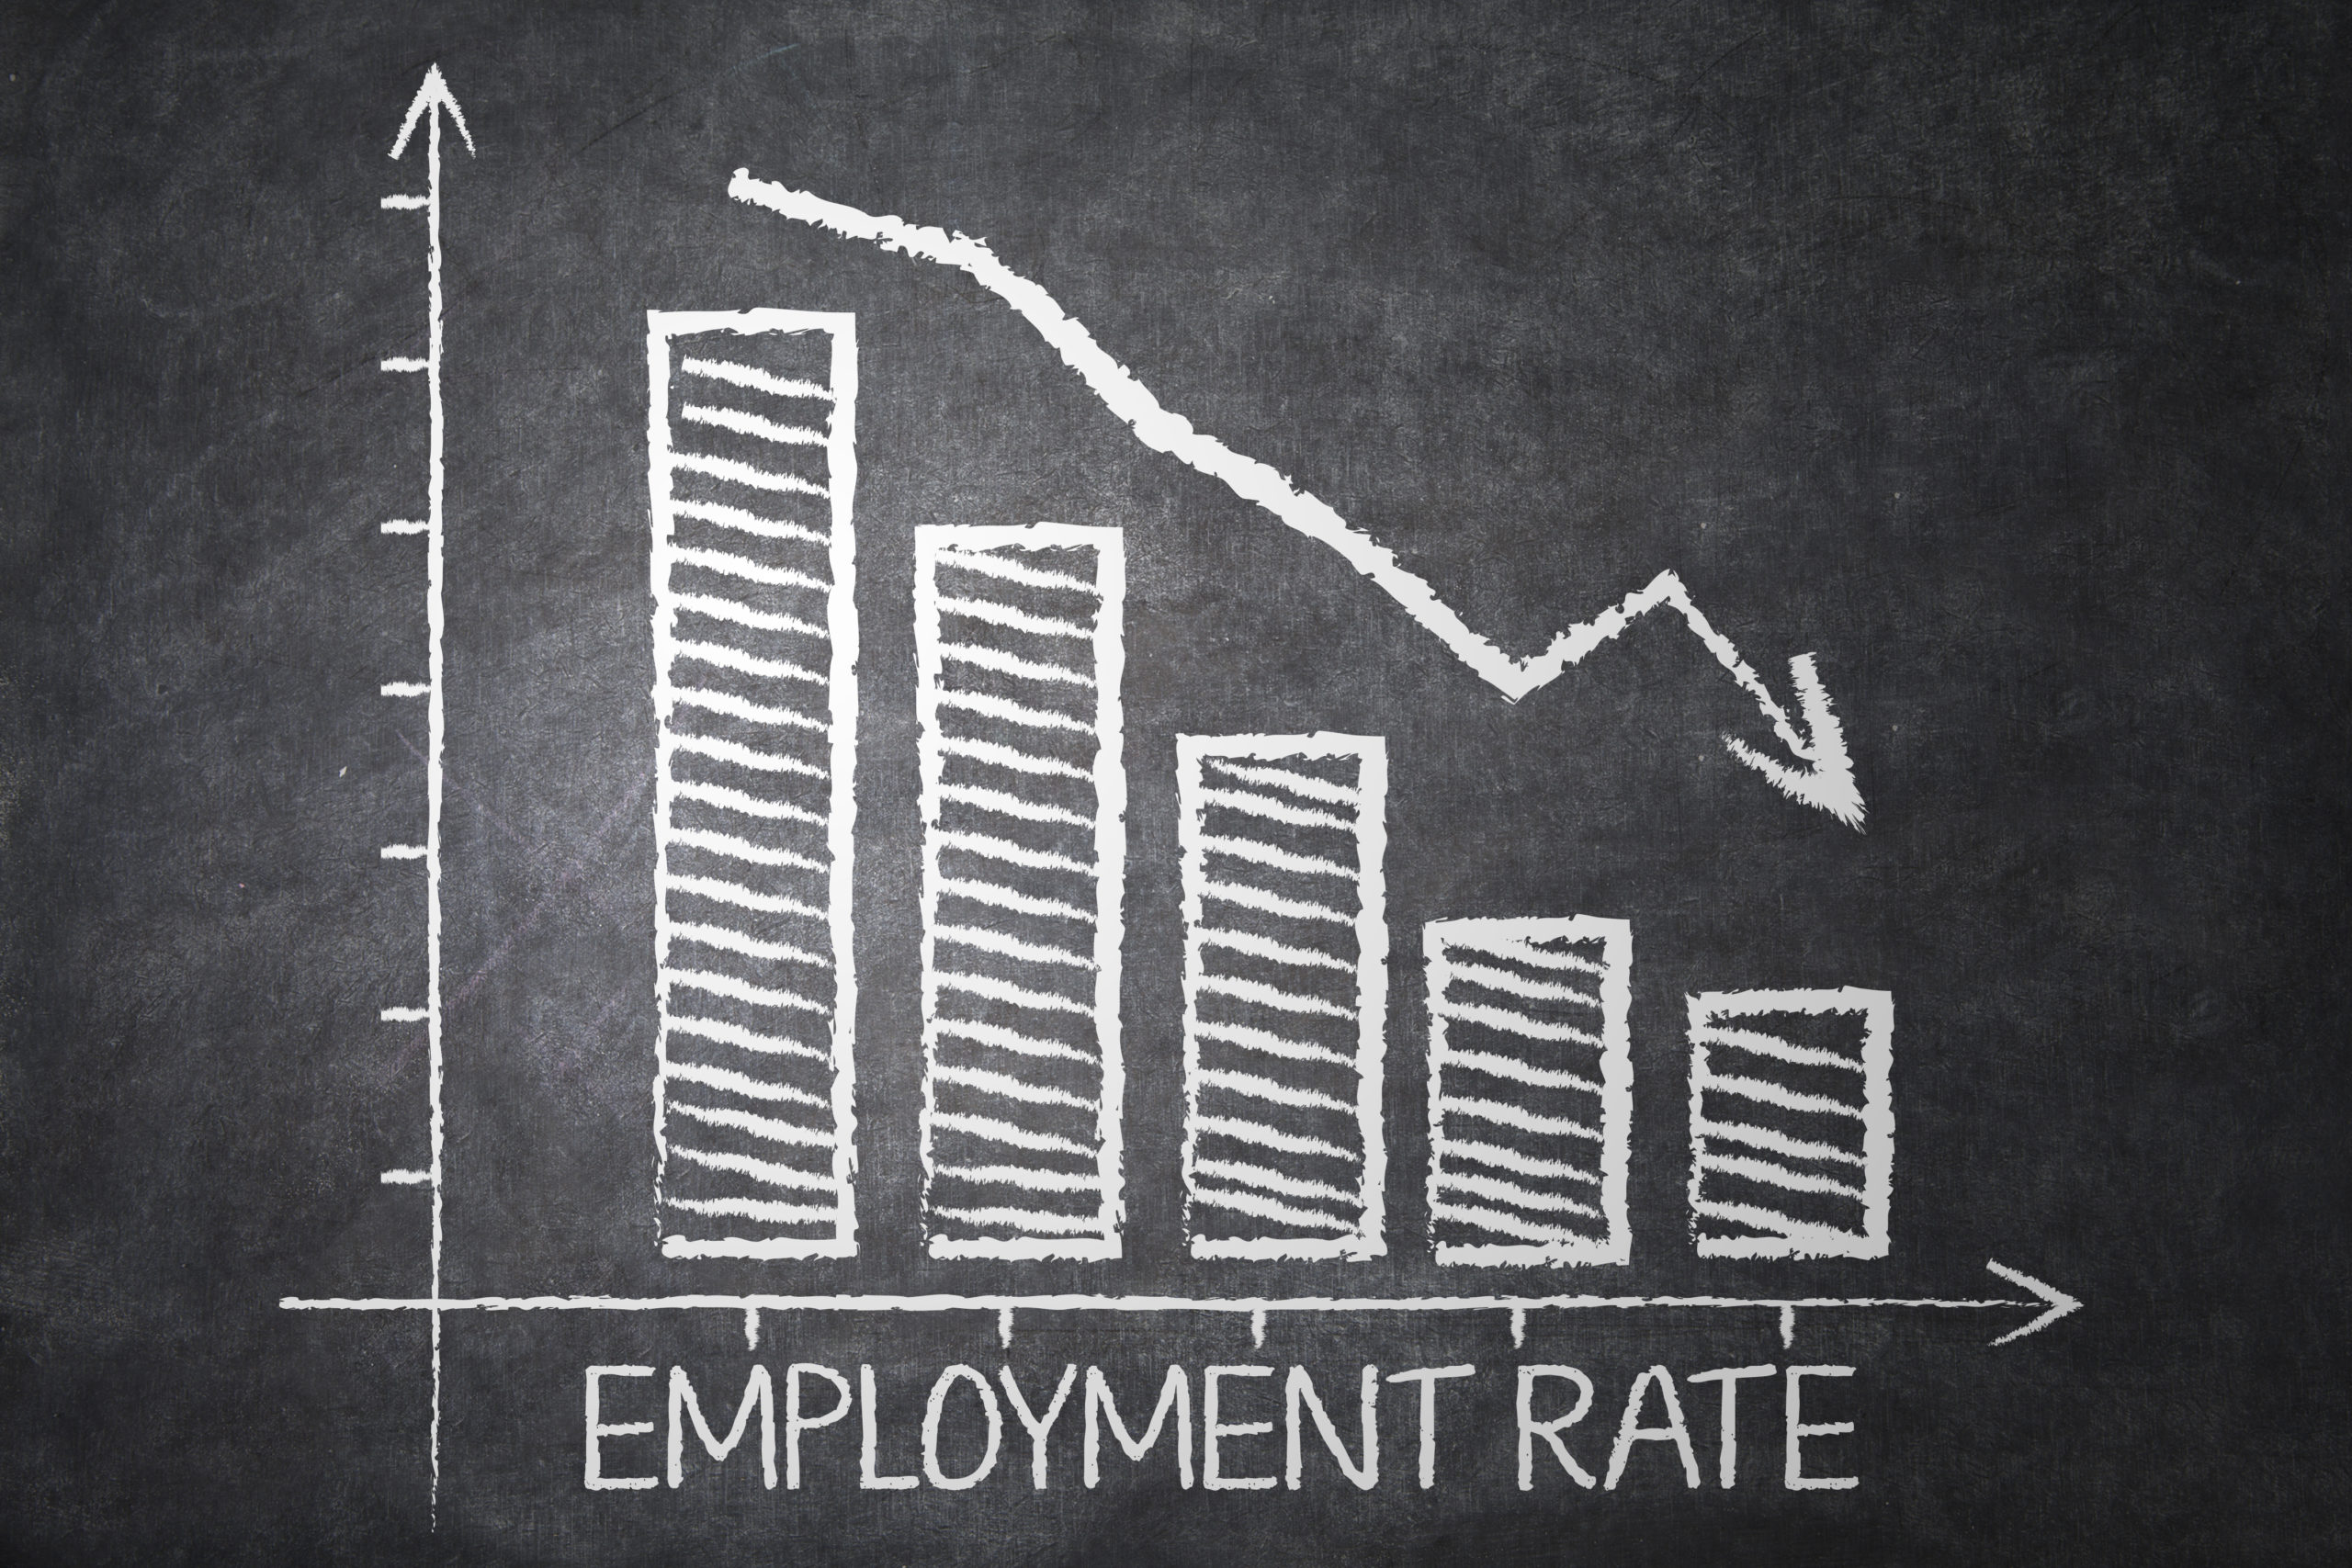 How the Unemployment Rate Has Affected the IT industry